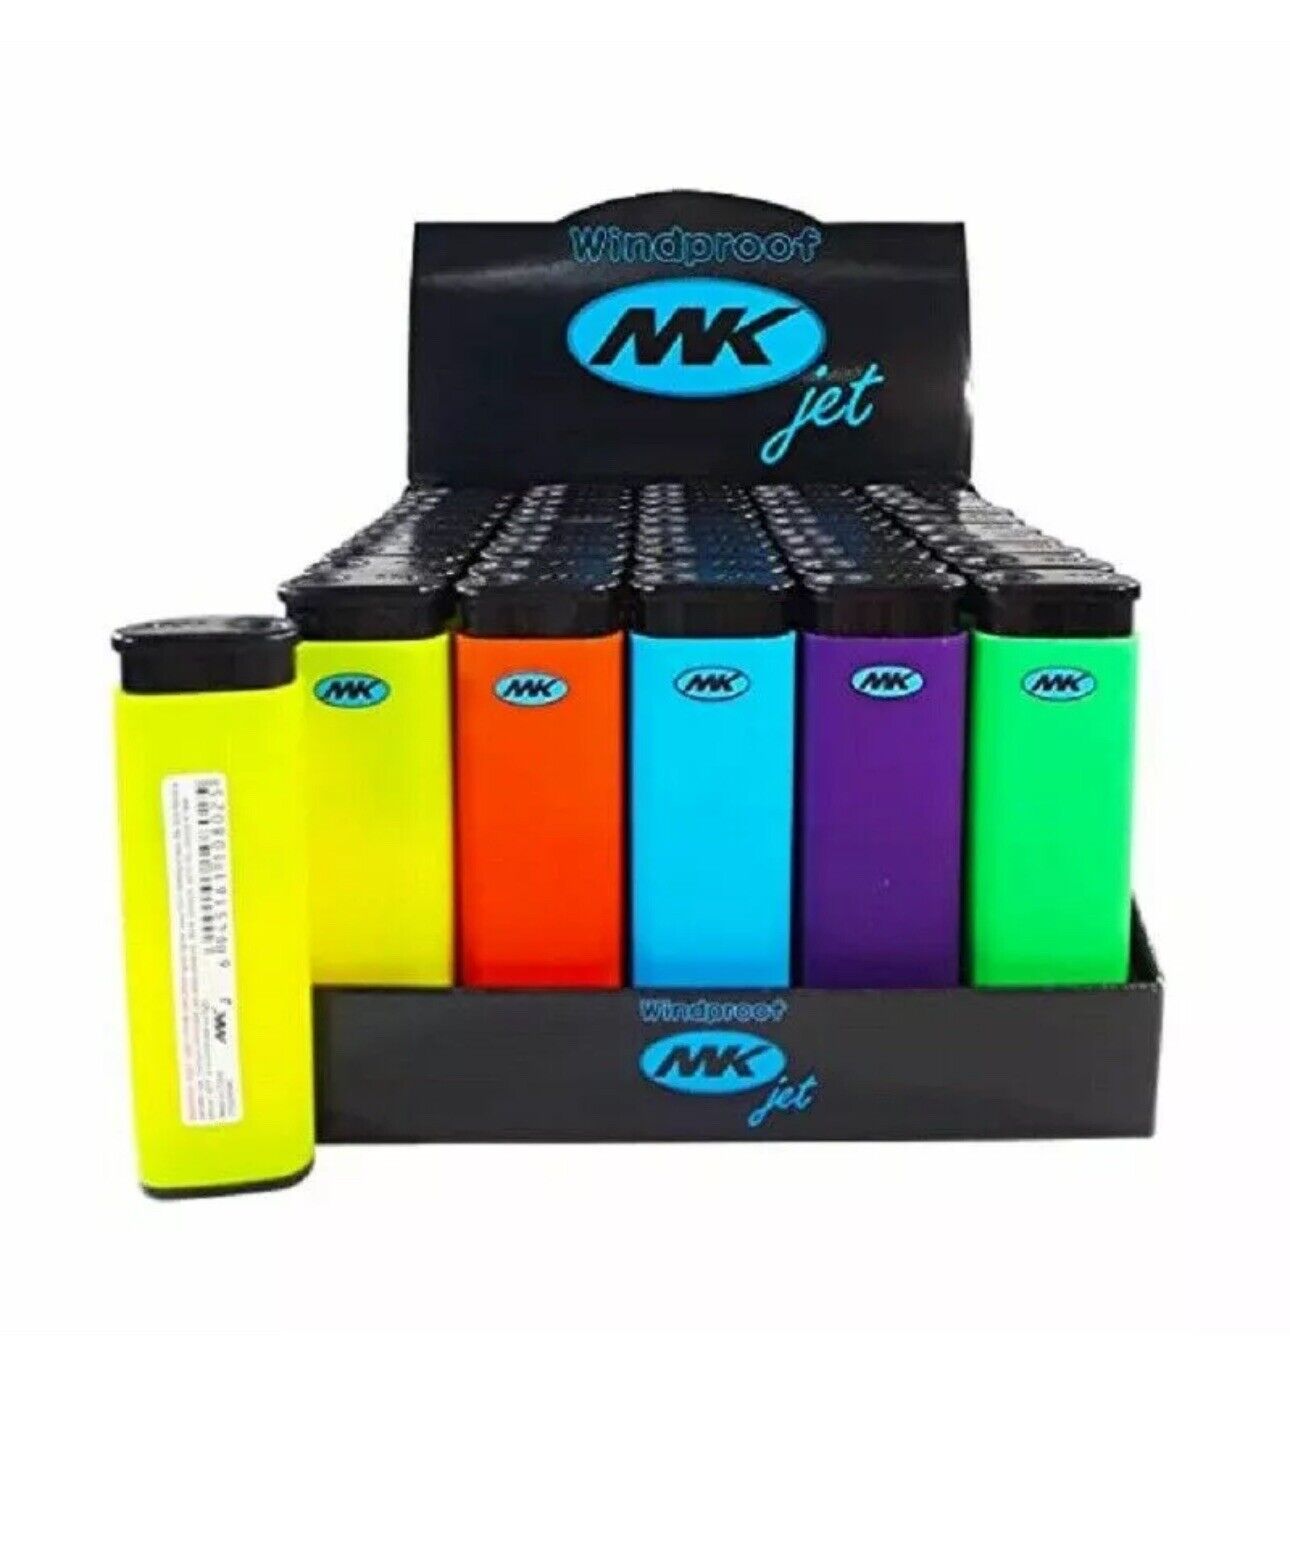 50 Ct MK JET ( Colors ) TORCH Full Size Lighters Refillable Windproof Full Tray